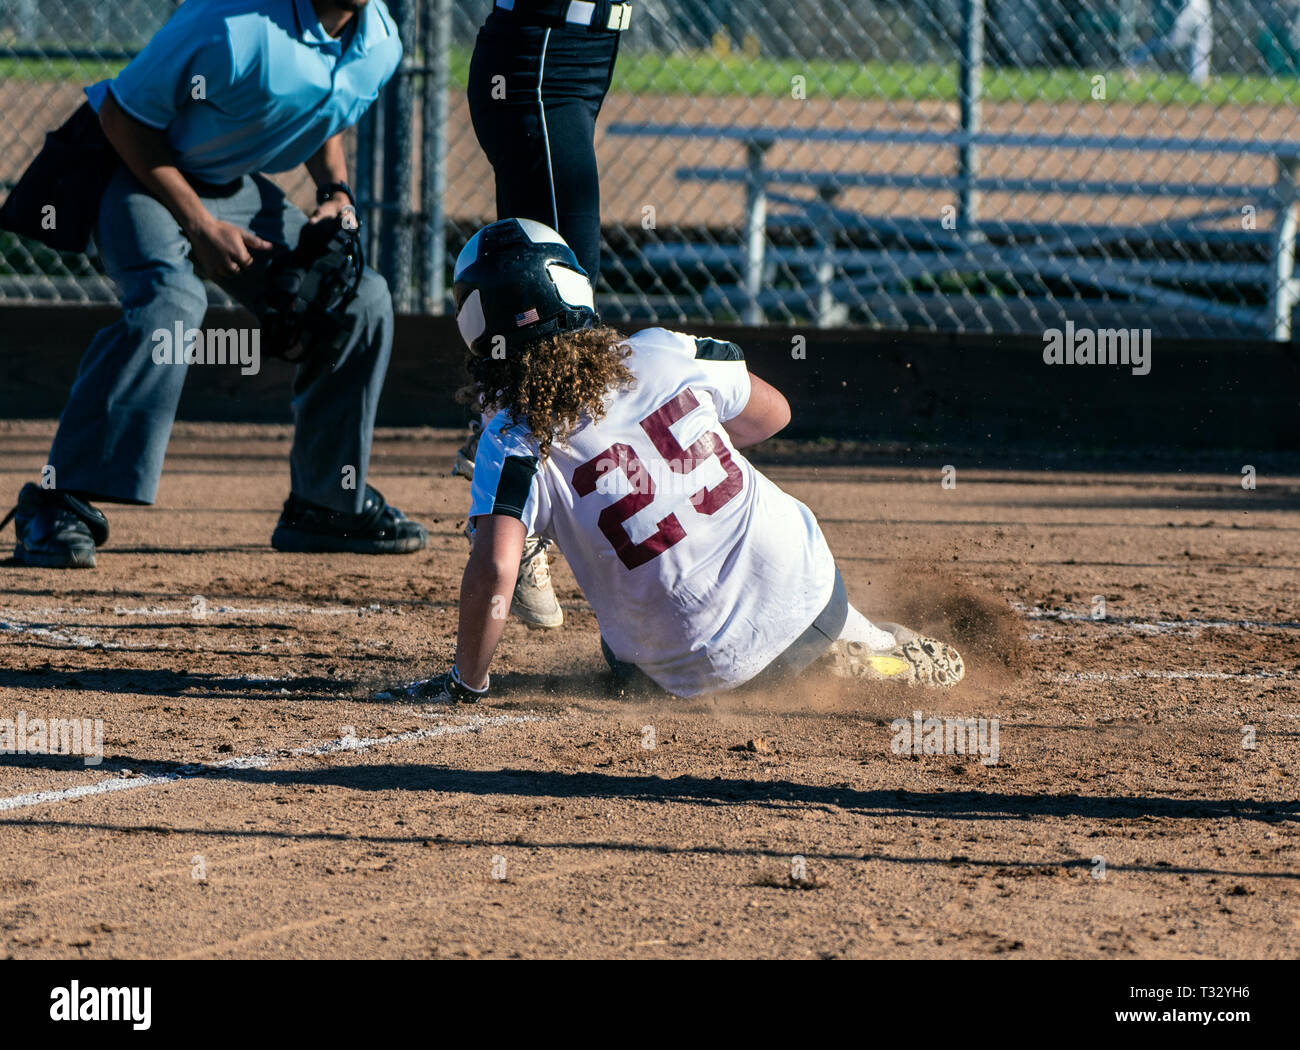 Athletic female softball player sliding safely into home plate under the legs of opponent. Stock Photo